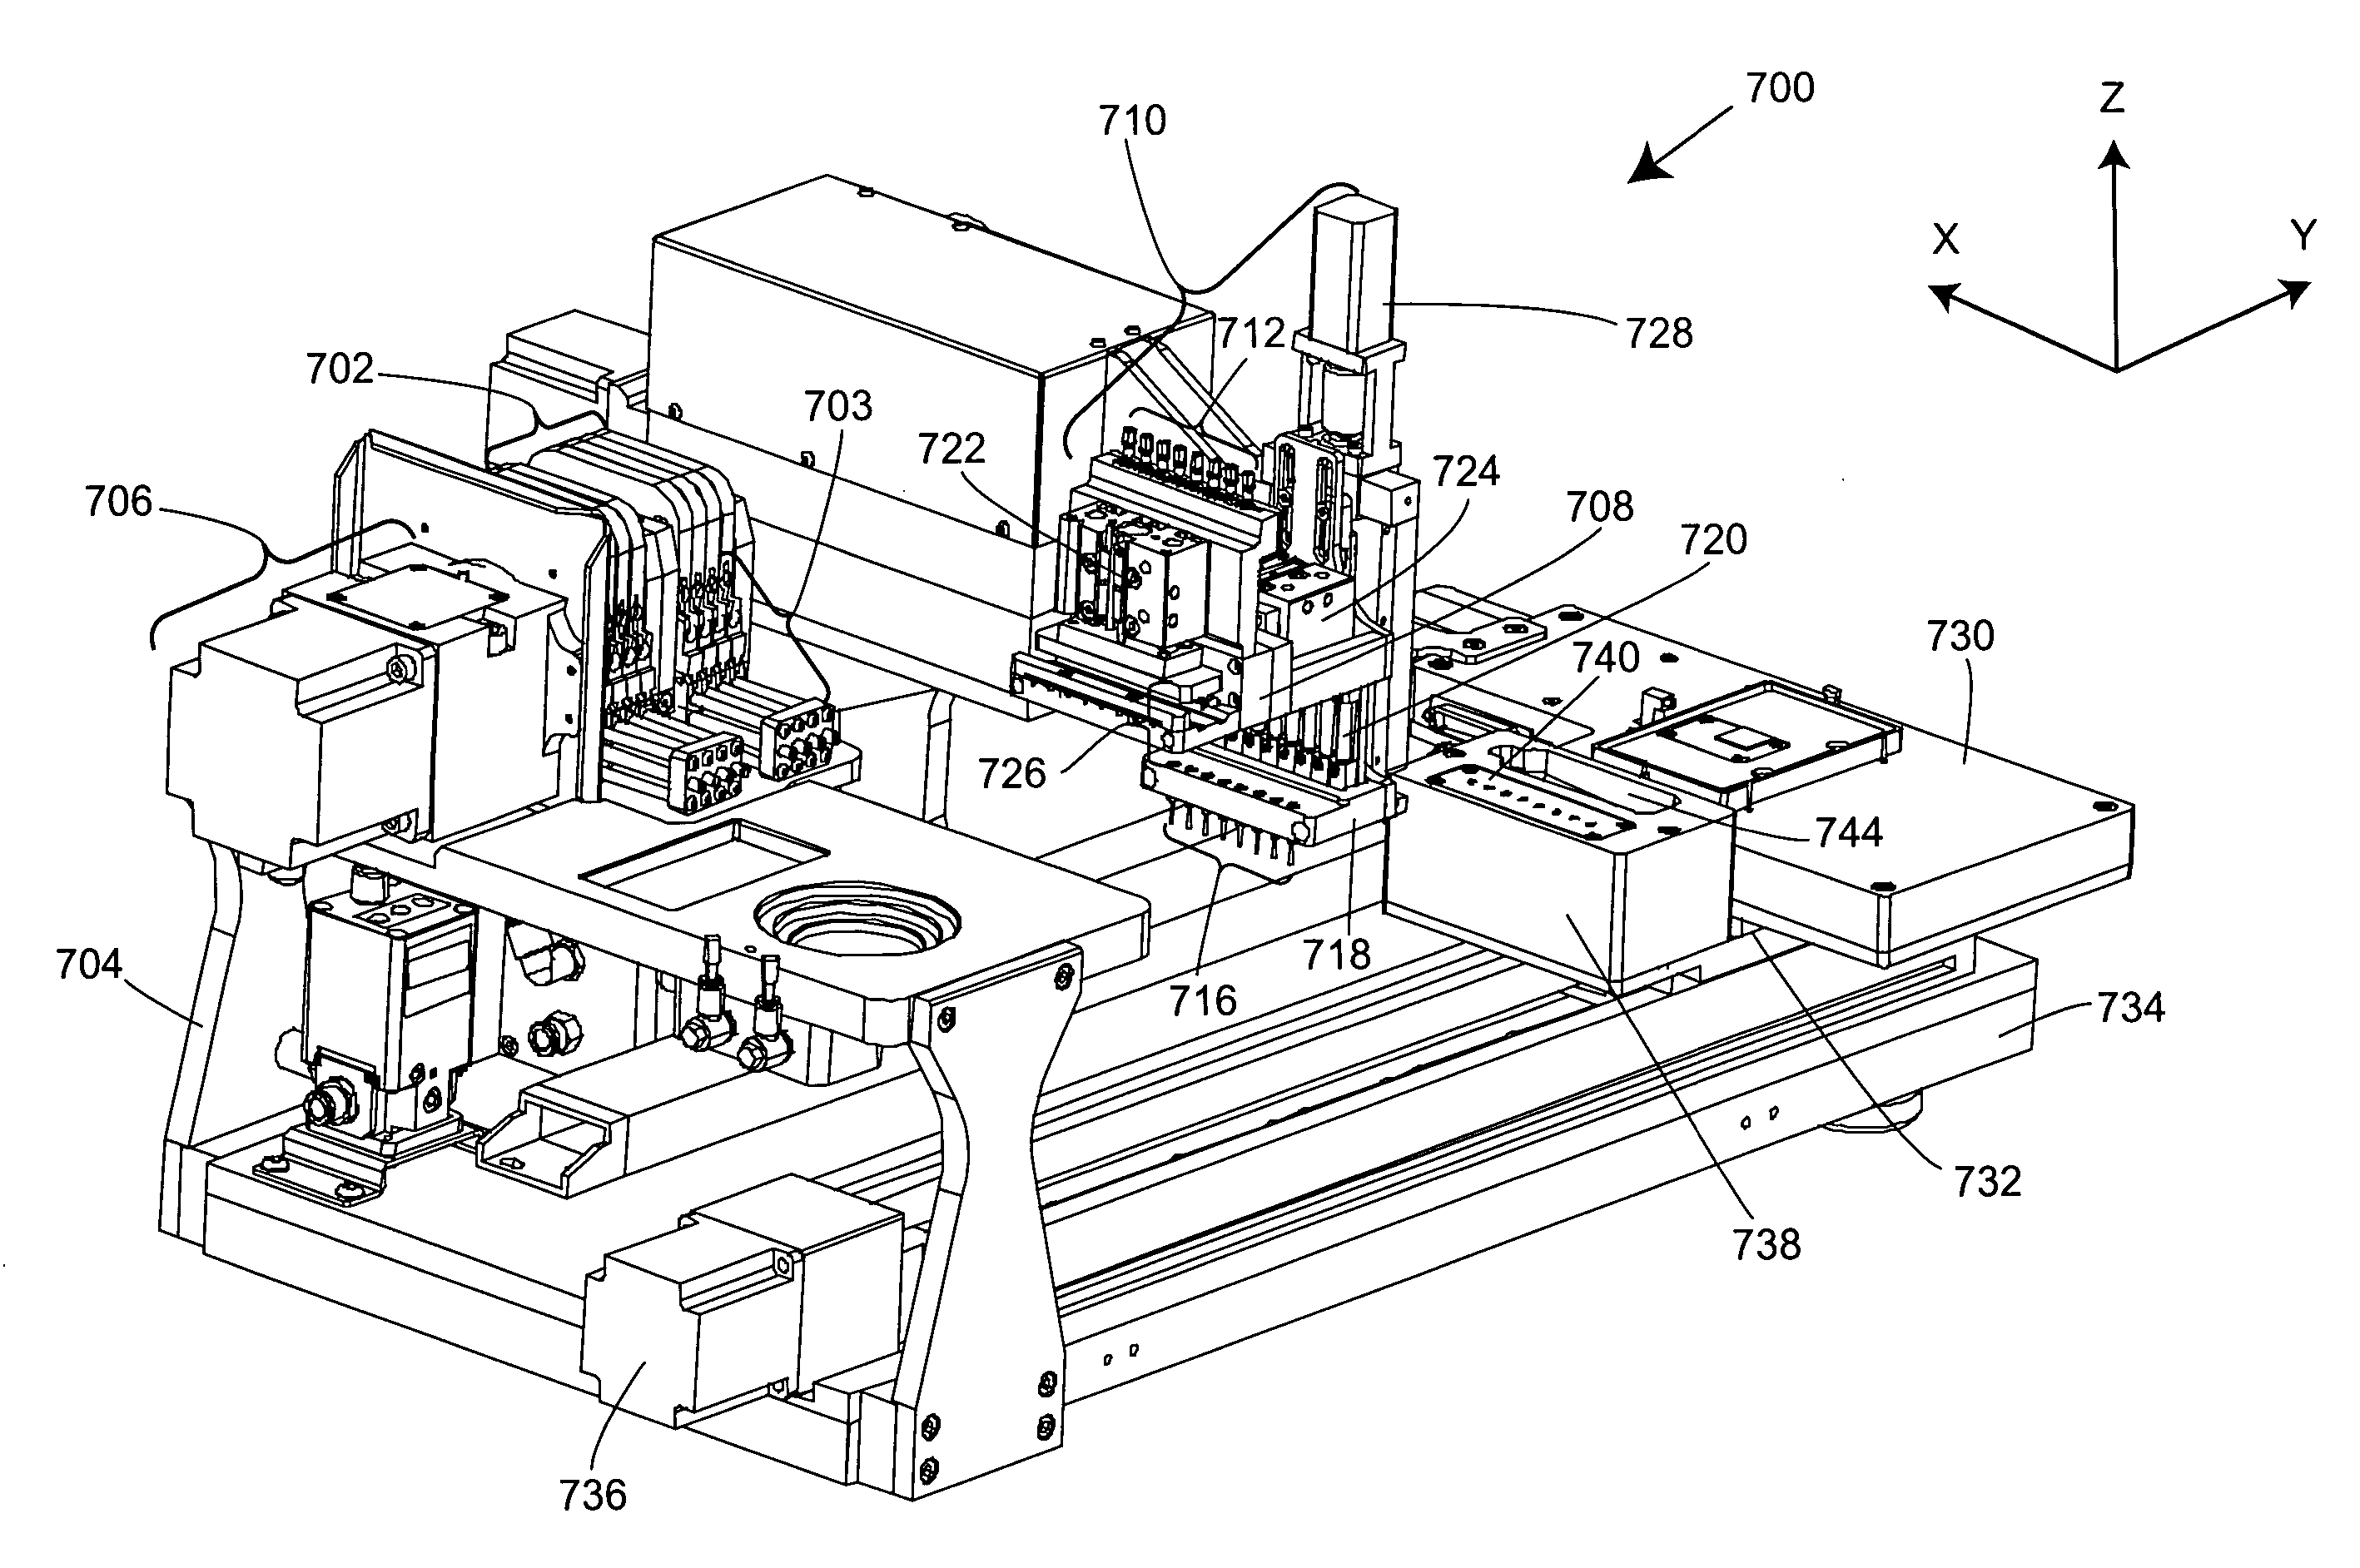 Dispensing systems, software, and related methods